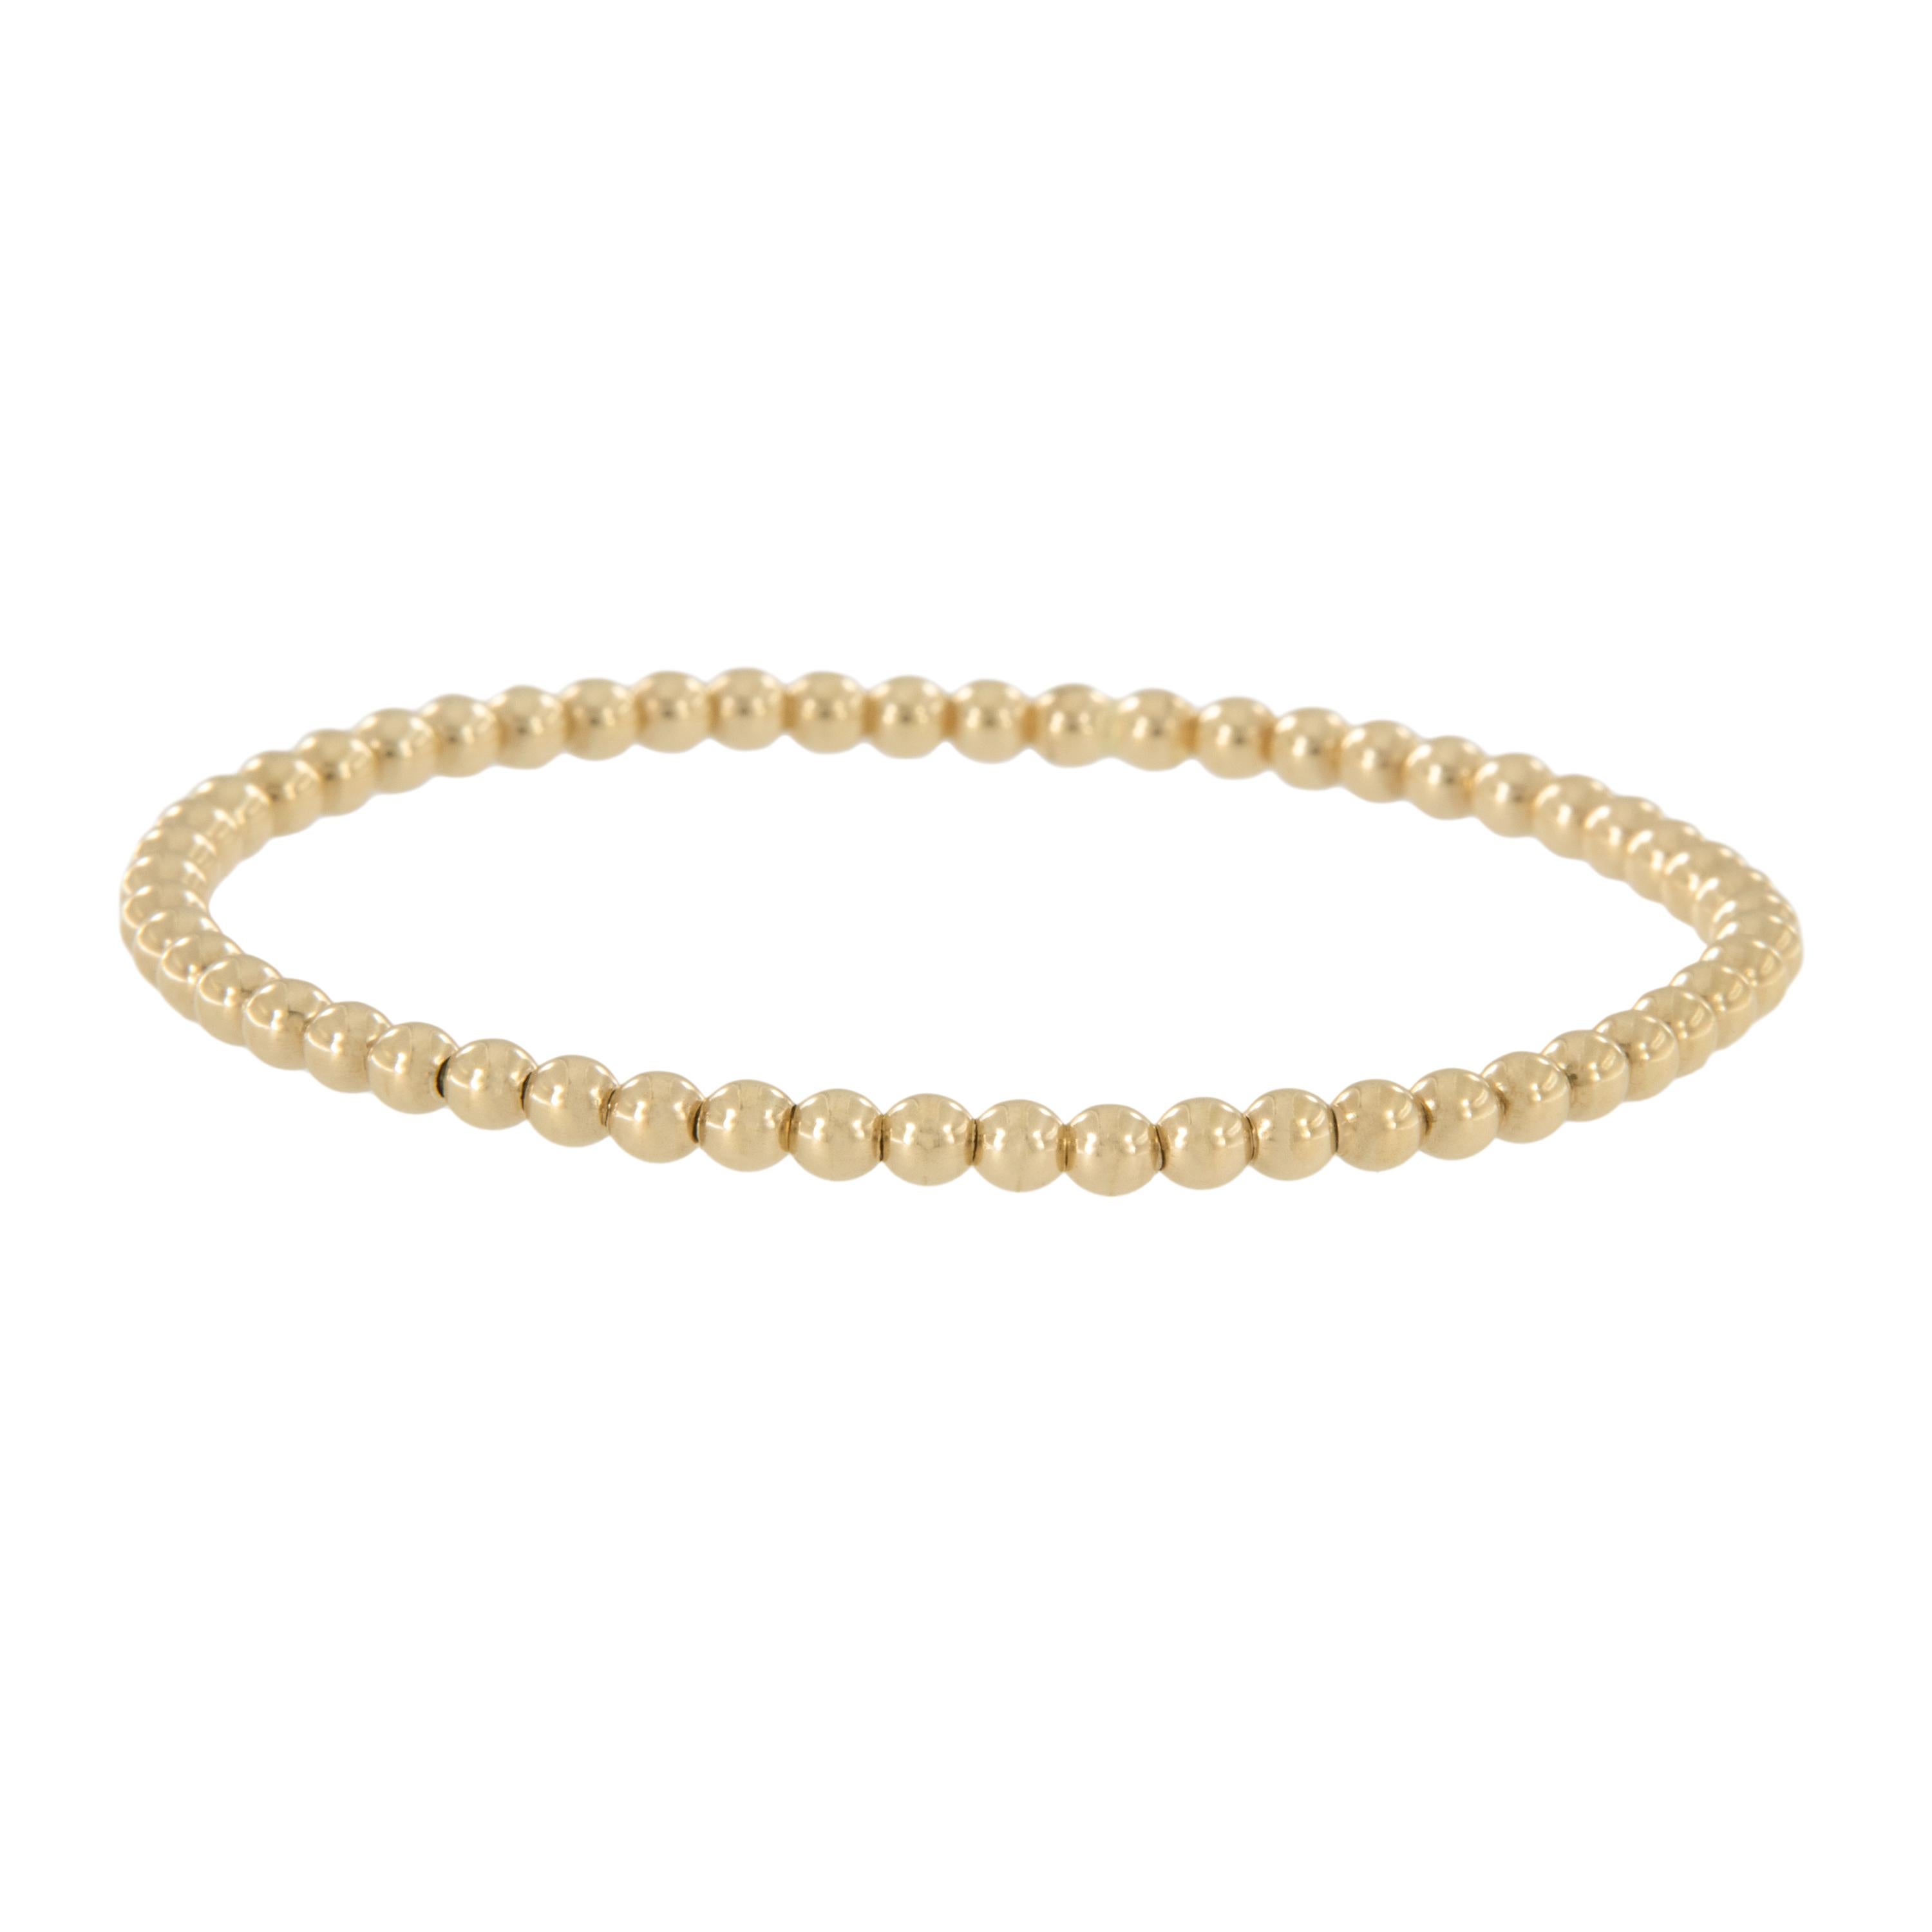 Known for their expert jewelry engineering, Italian craftsman specialize in making these solid and heavy weight quality stretch jewelry! This fun bracelet stretches to fit your wrist perfectly for a spectacular look! Can be worn every day, dressed